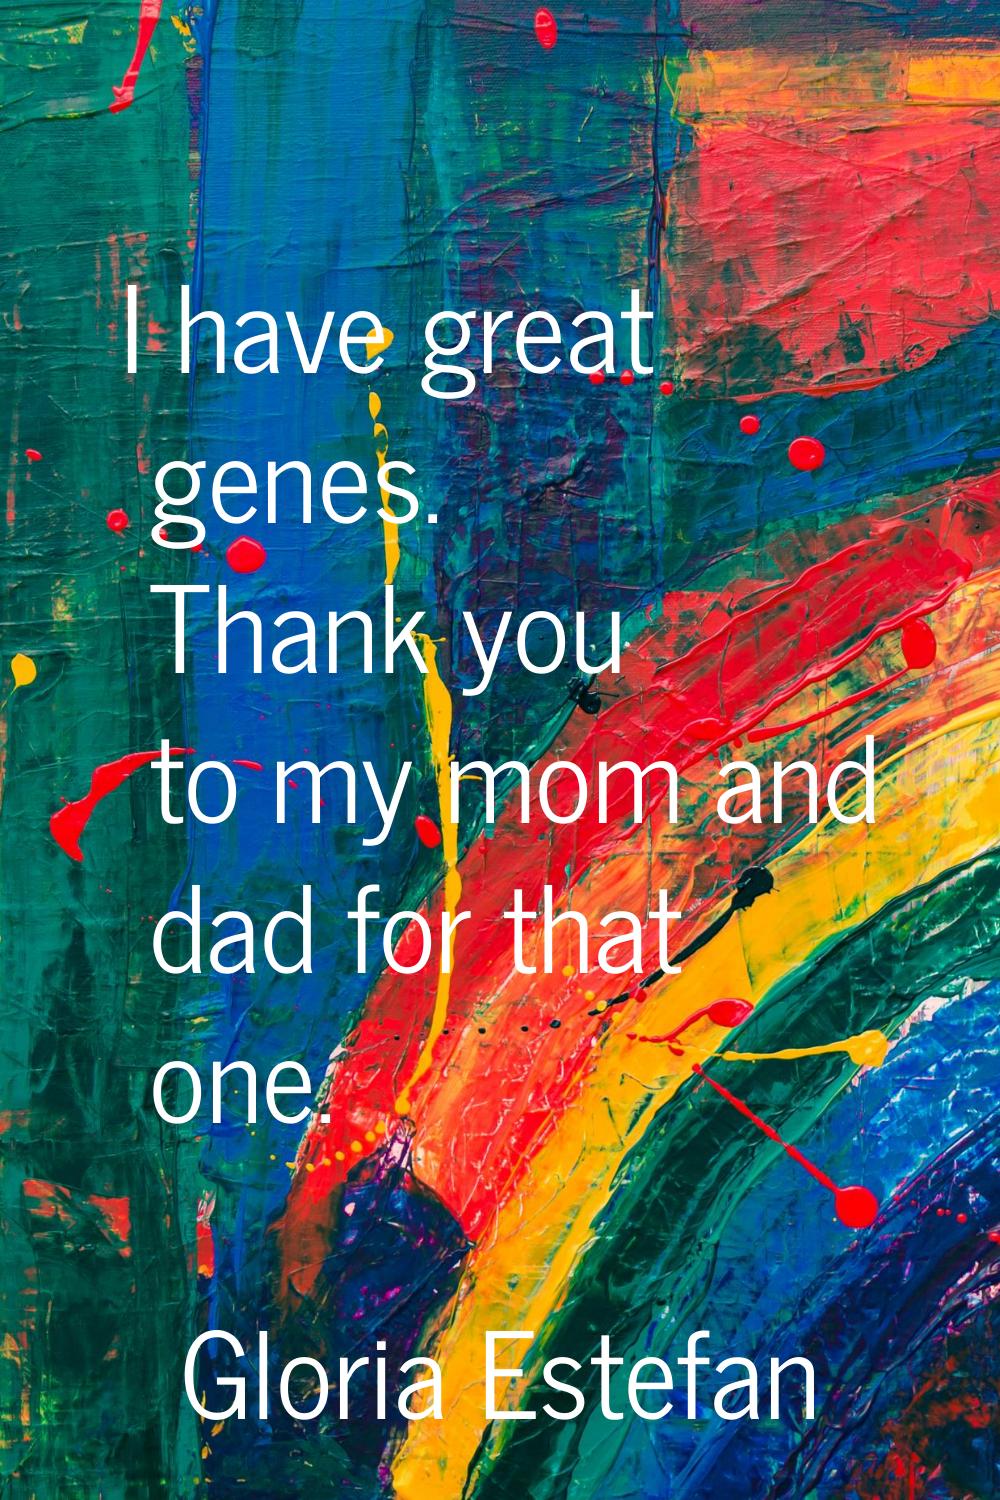 I have great genes. Thank you to my mom and dad for that one.